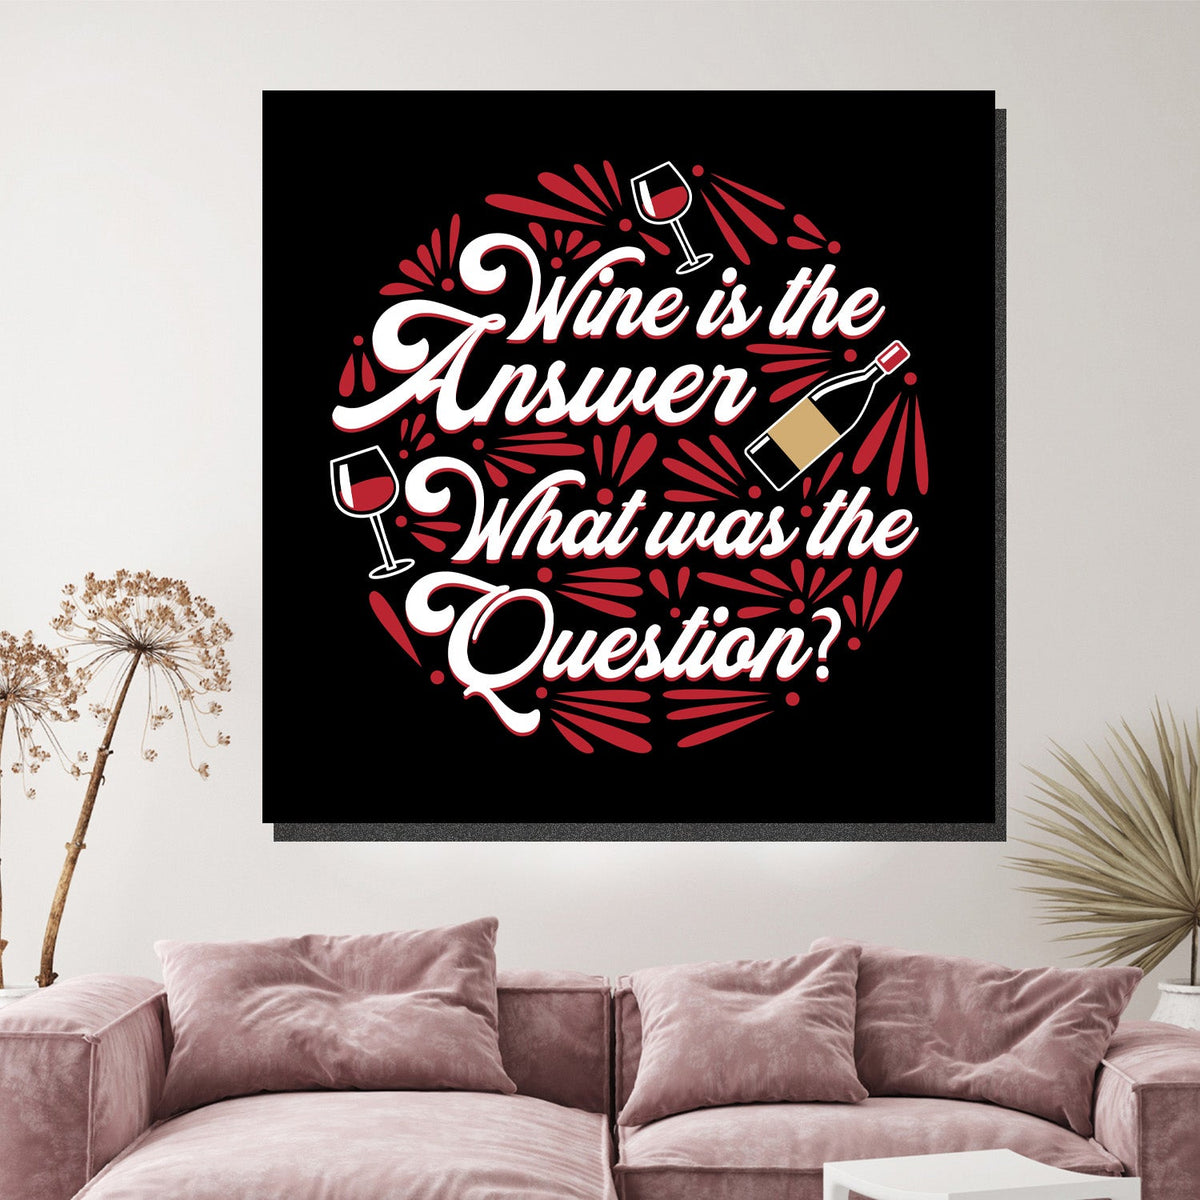 https://cdn.shopify.com/s/files/1/0387/9986/8044/products/WineistheAnswerCanvasArtprintStretched-1.jpg